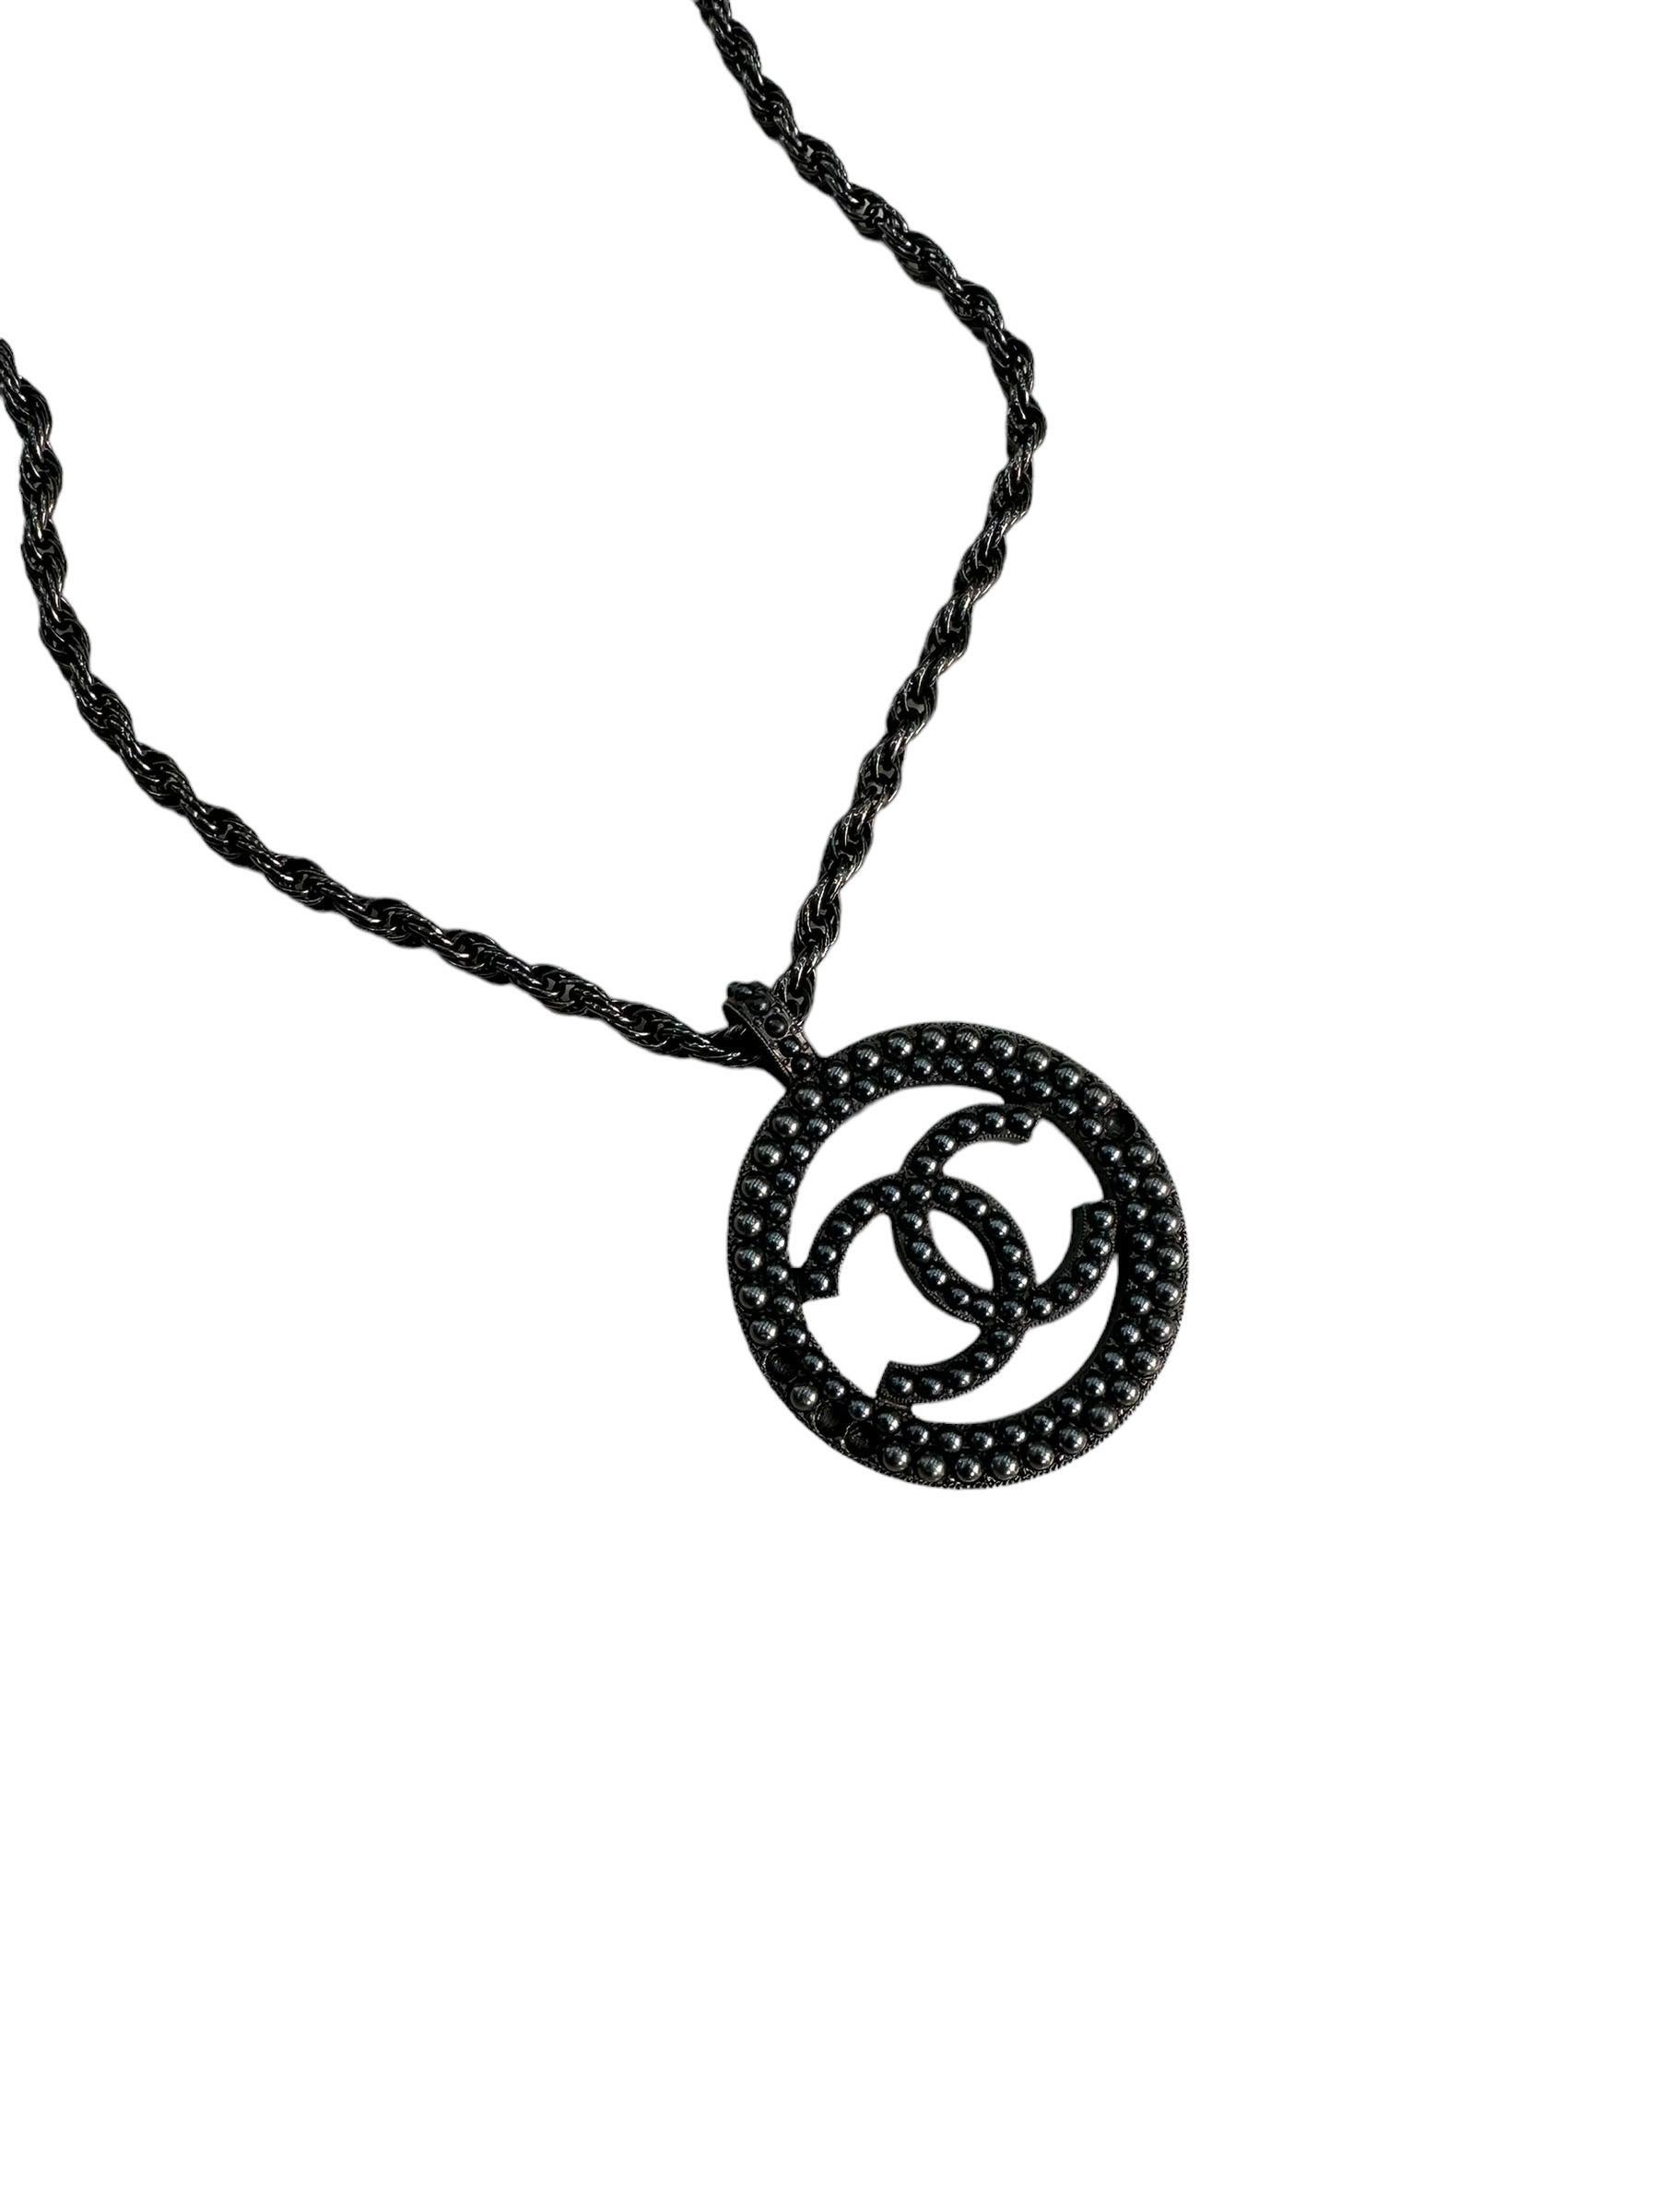 Chanel signed necklace, Big Logo model, made of gray matte with small gray pearls on the front. Equipped with a hook closure, it is in good condition, with some missing beads.

